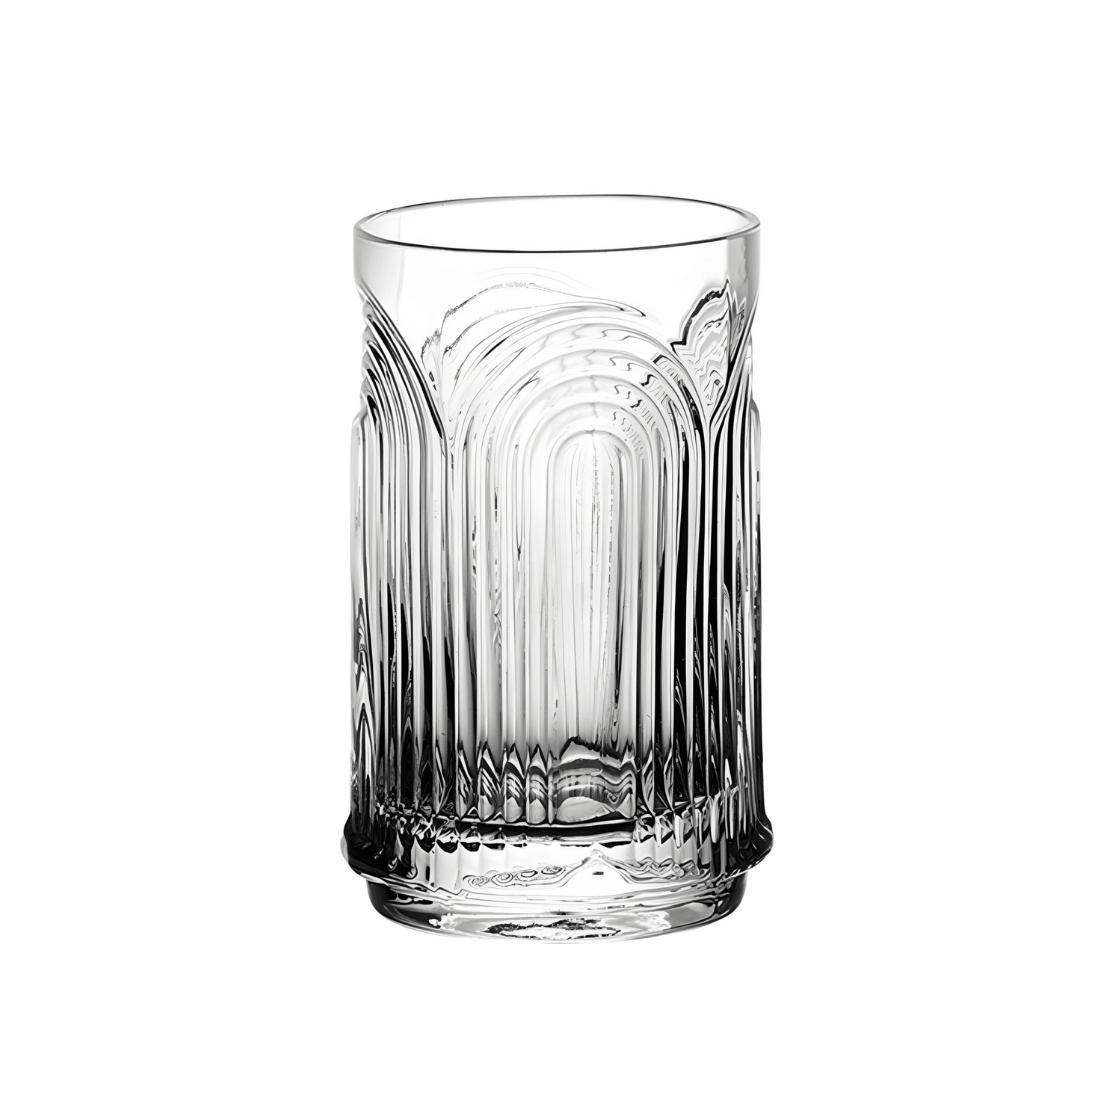 Medium arched line shape drinking glass